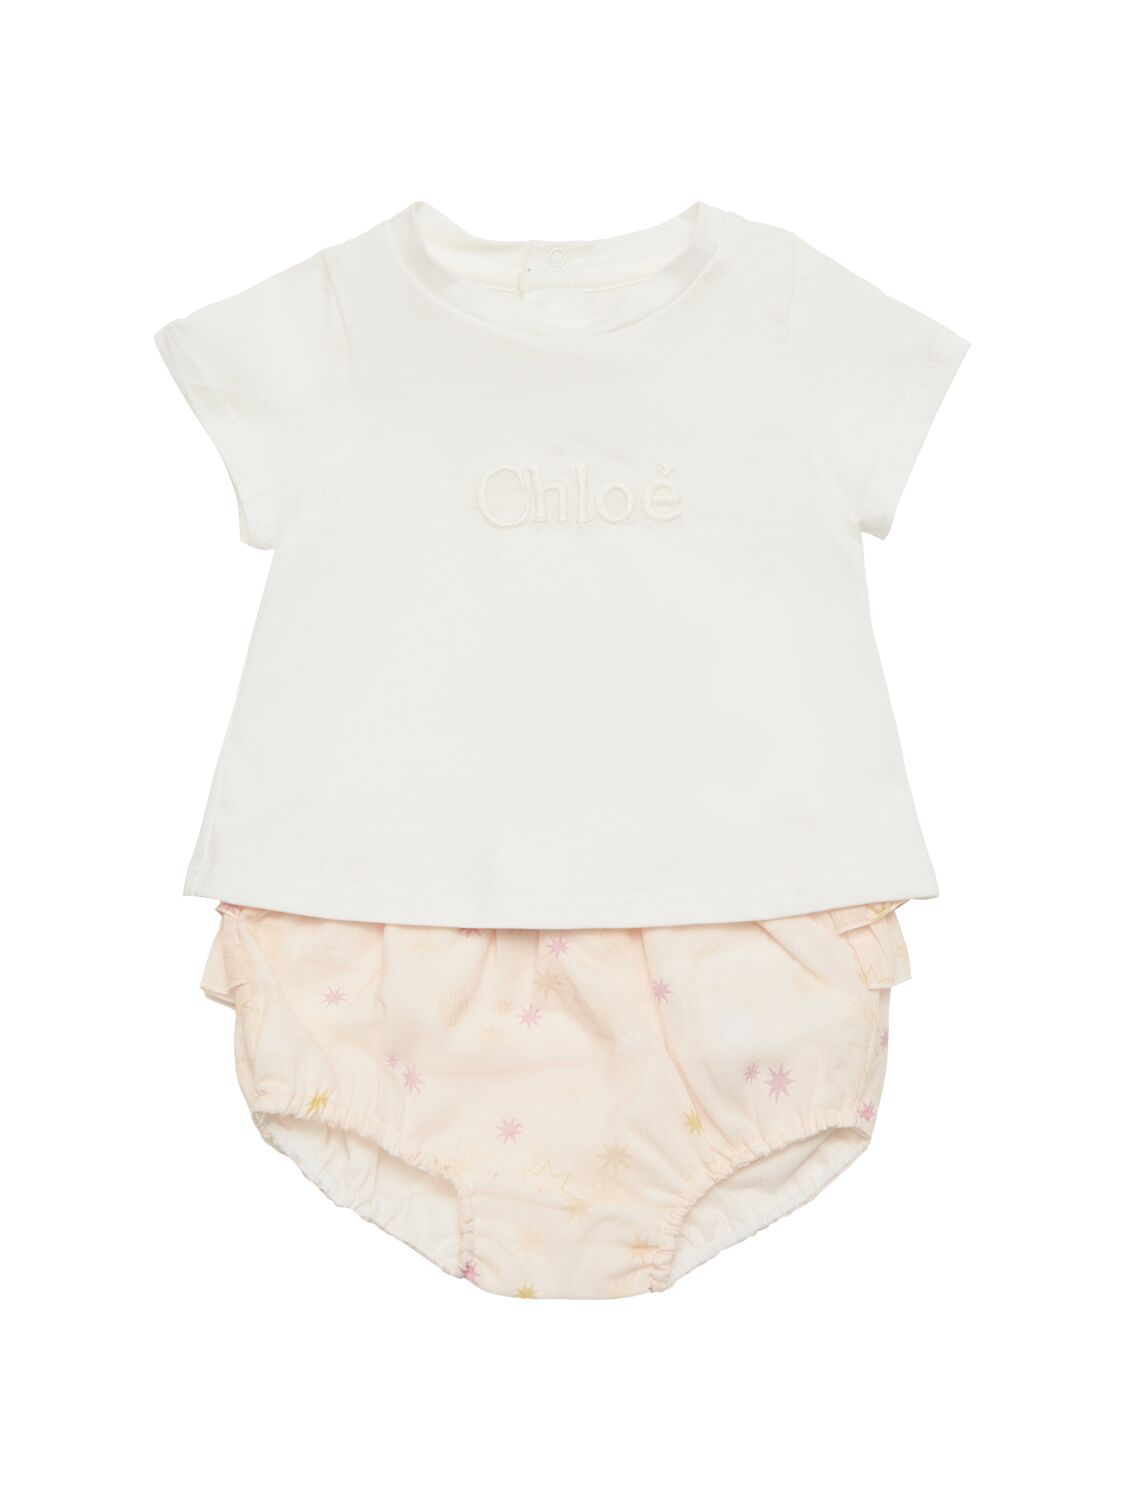 Chloé Babies' Organic Cotton T-shirt & 2 Diaper Covers In White,pink